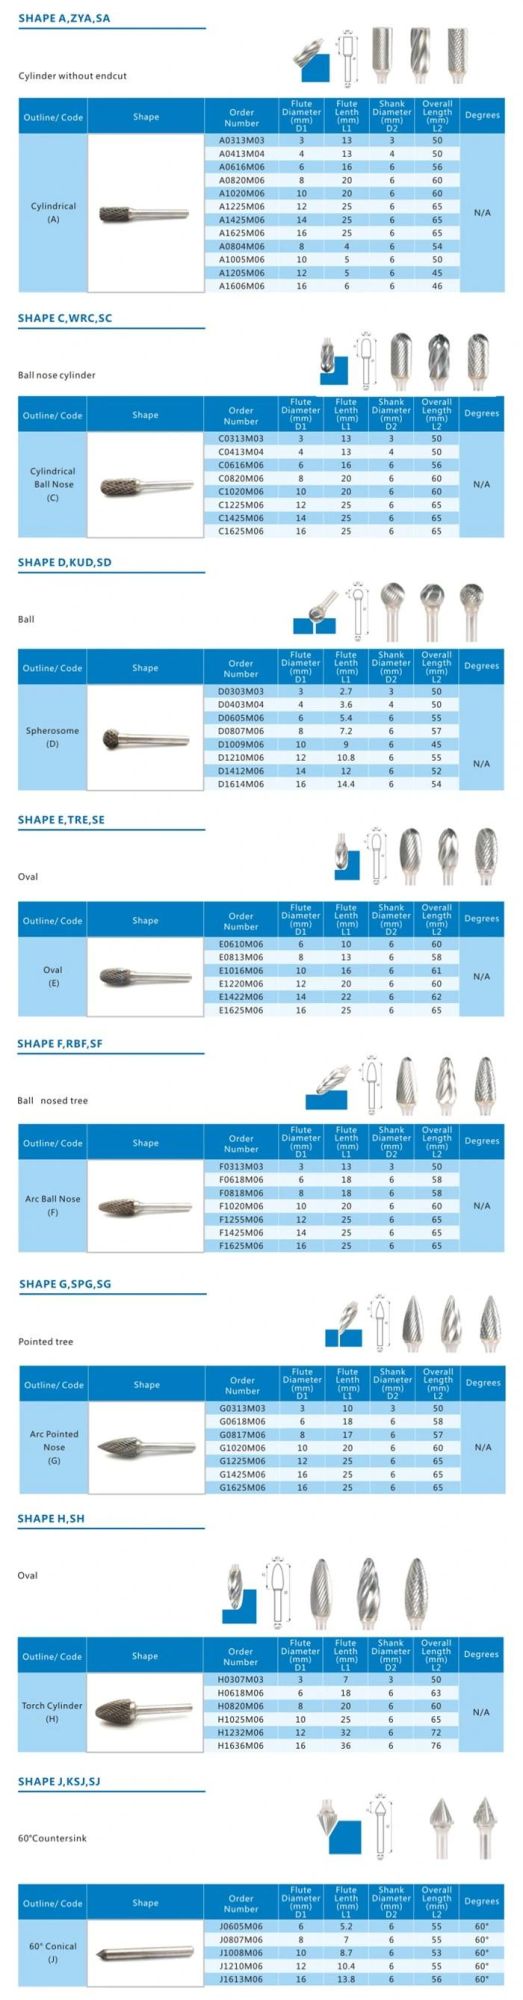 Carbide Cylindrical SA-5 Burrs for Controlling Edge Charmfering Rounding